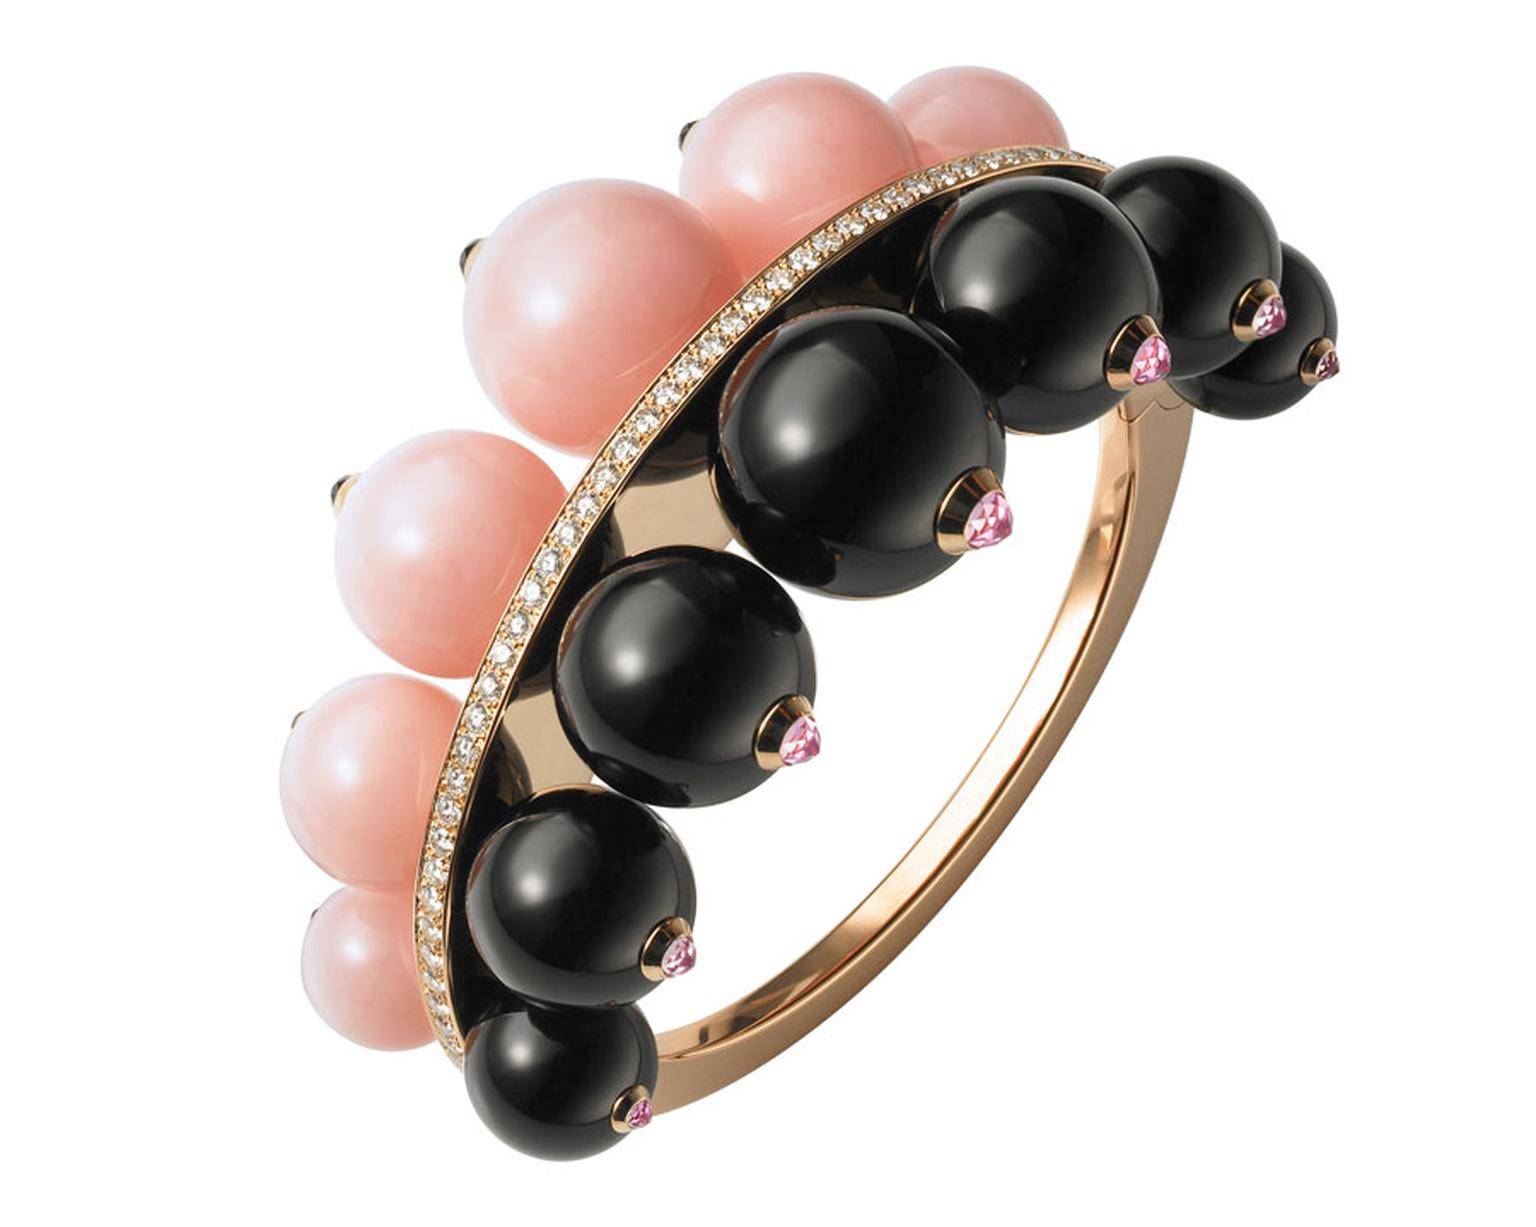 Cartier bracelet from the Évasions Joaillières Collection in pink gold, set with pink opals, onyx and diamonds